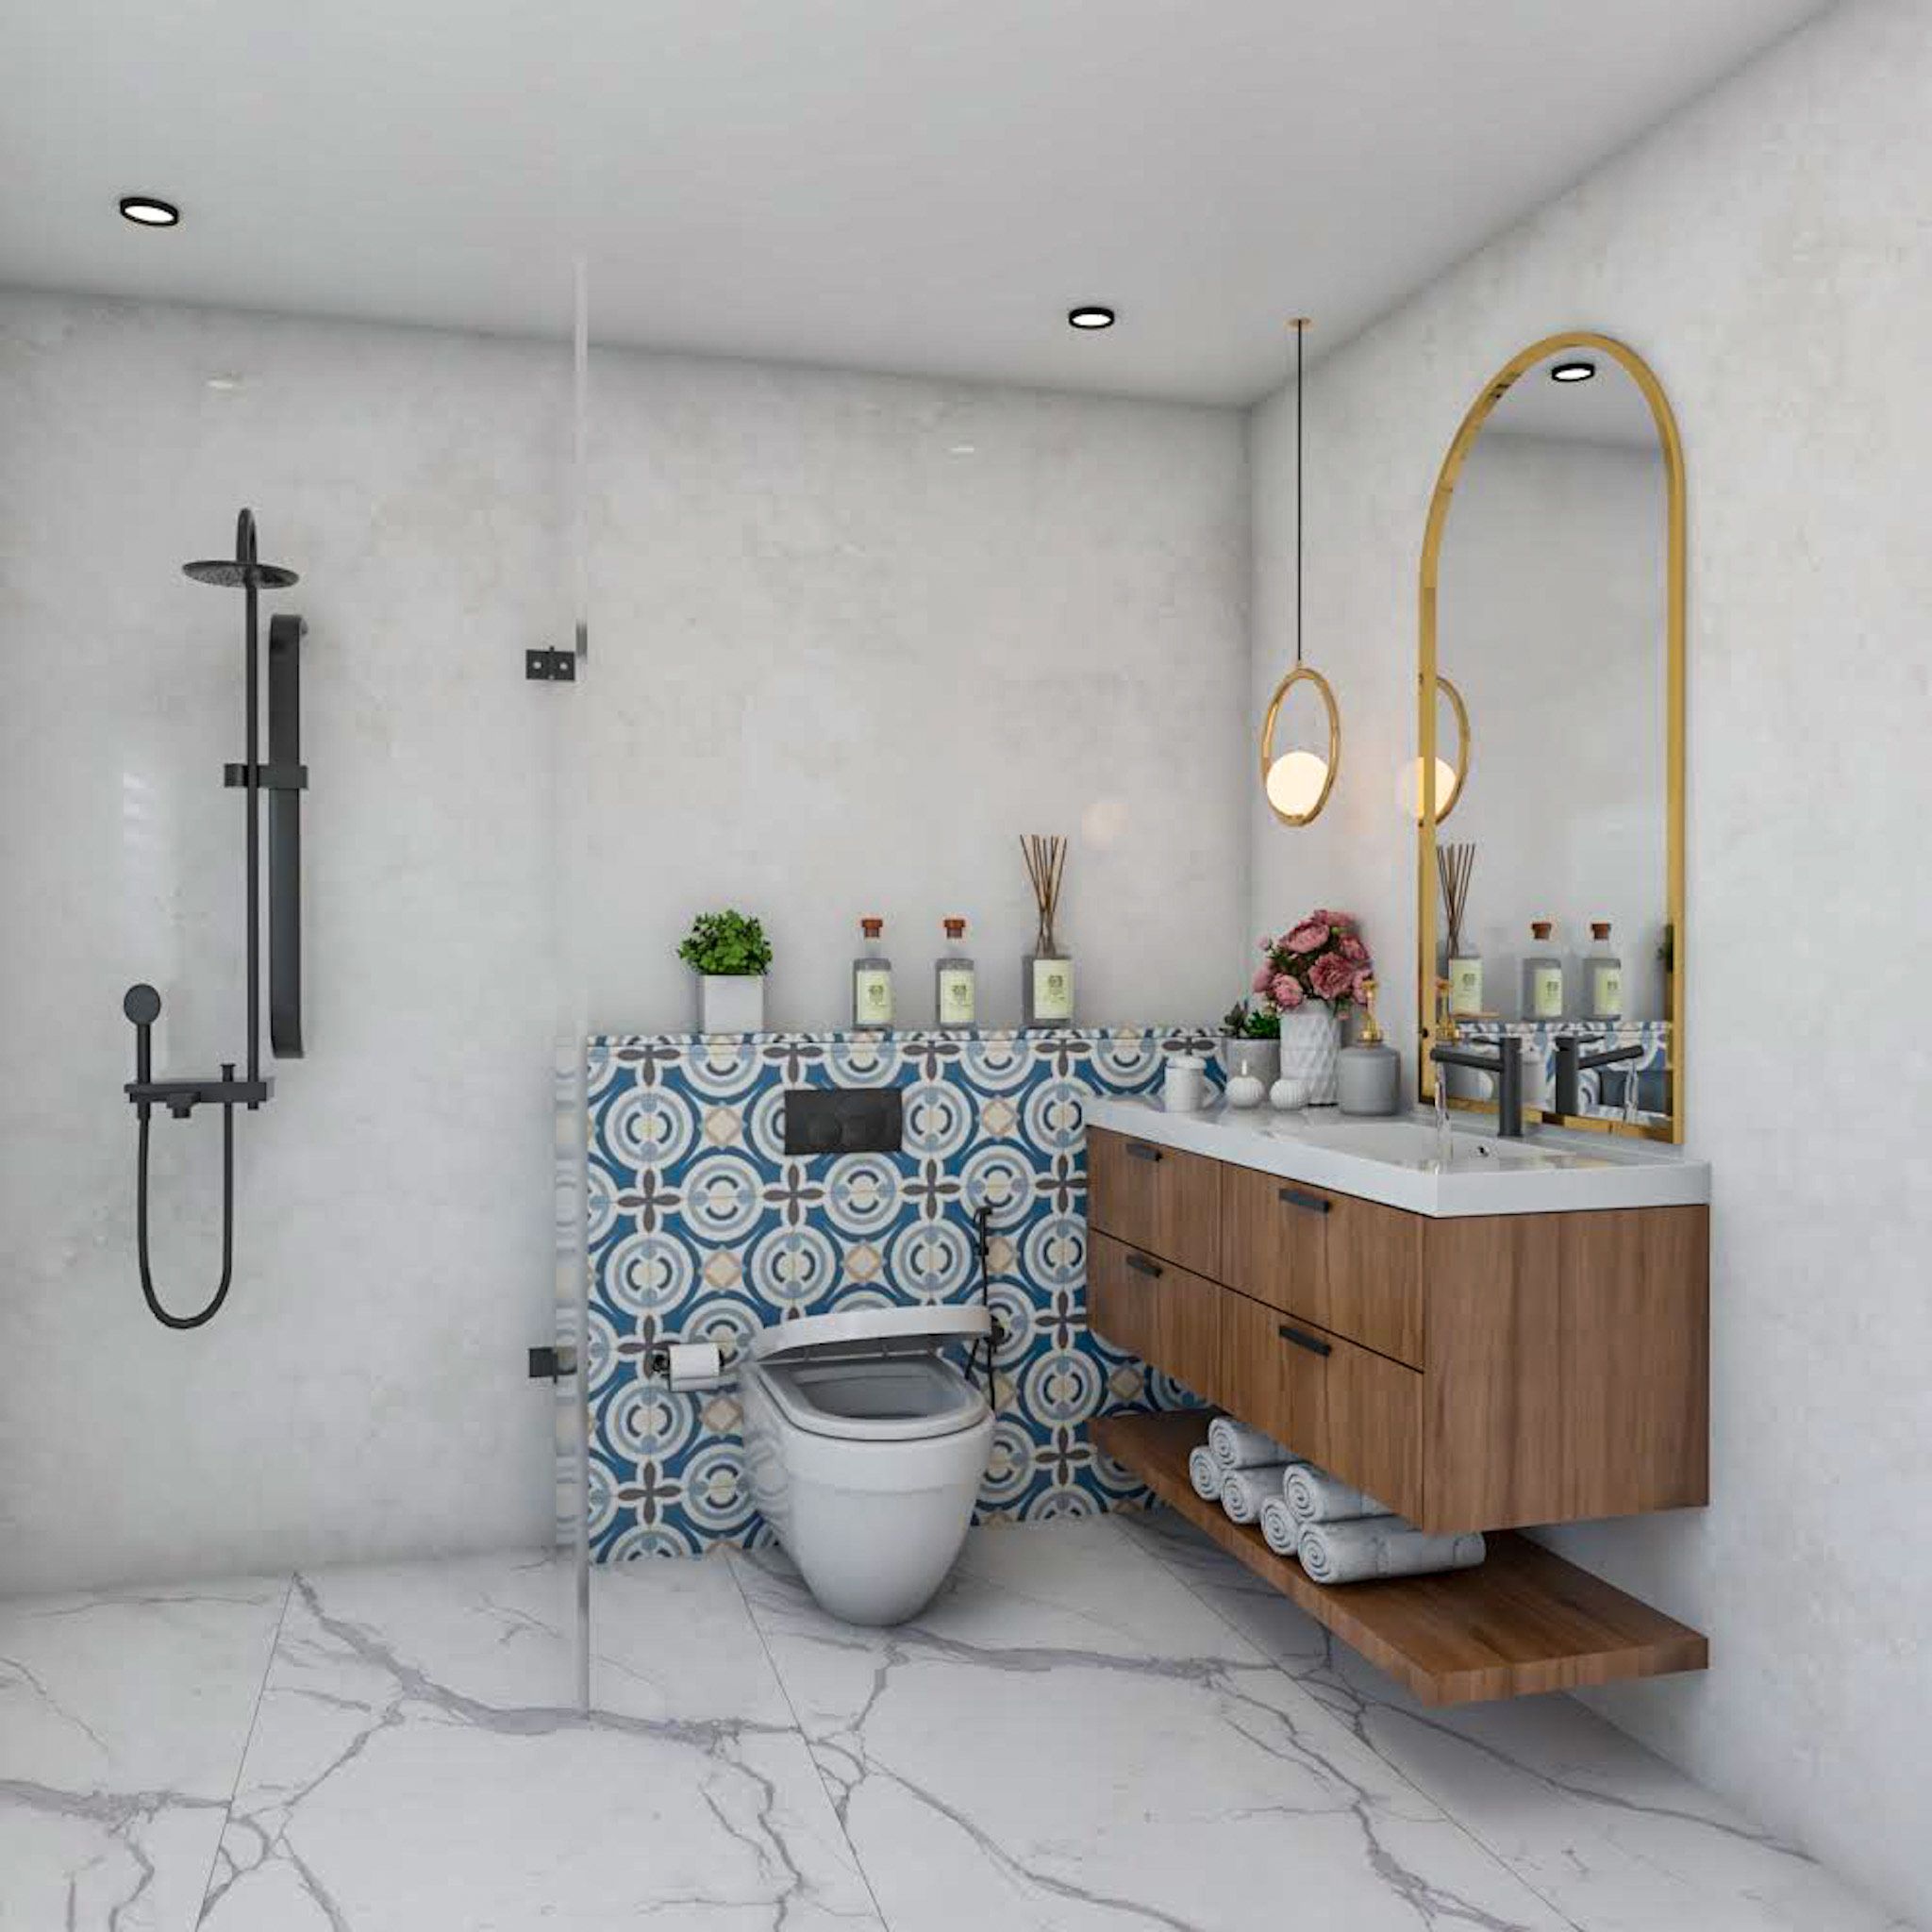 Classic Bathroom Design With A Gold-Framed Mirror